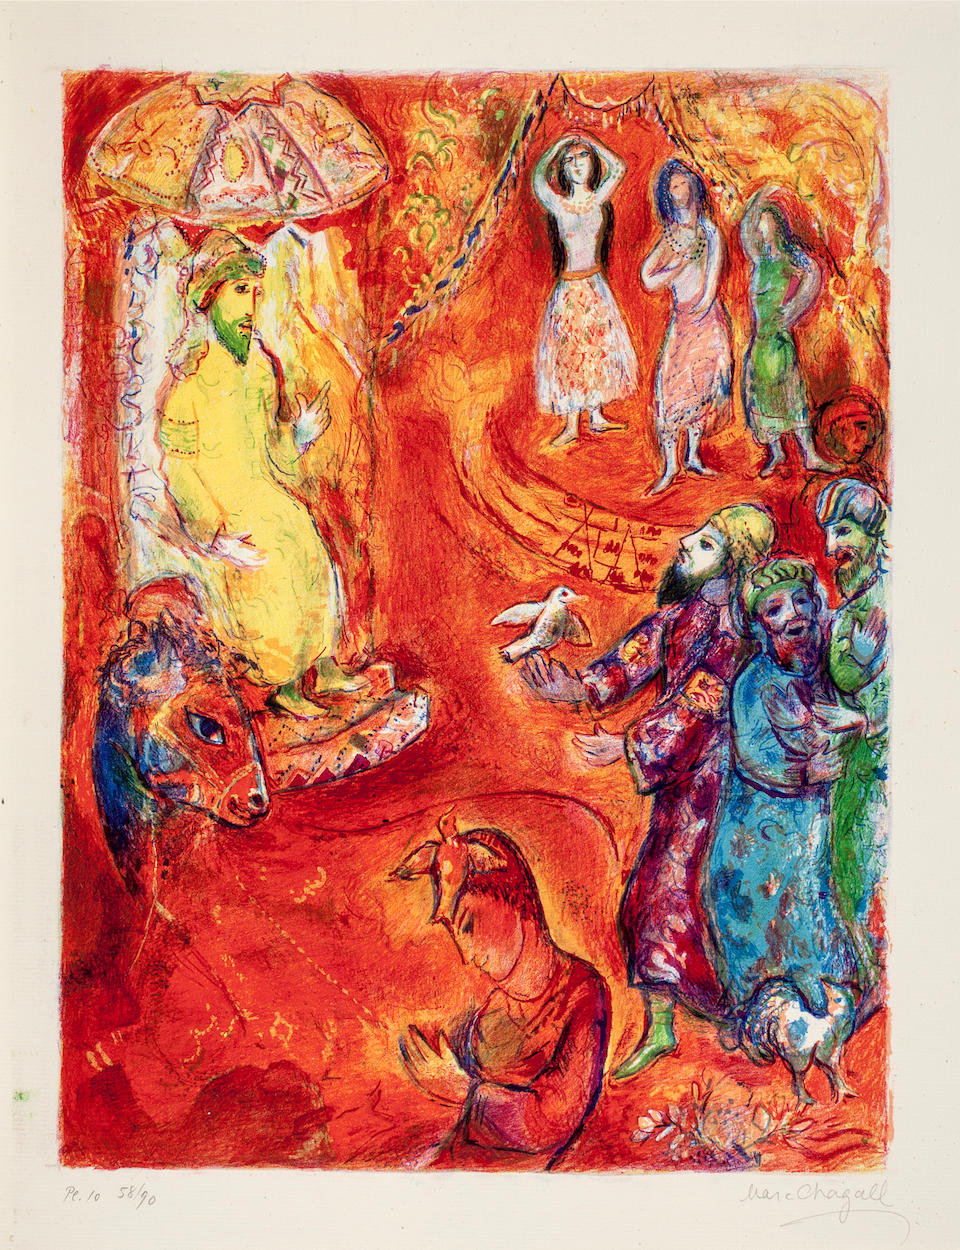 CHAGALL, MARC. RUSSIAN/FRENCH, 1887-1985. Four Tales from the Arabian Nights. New York: Pantheon Books, [1948].